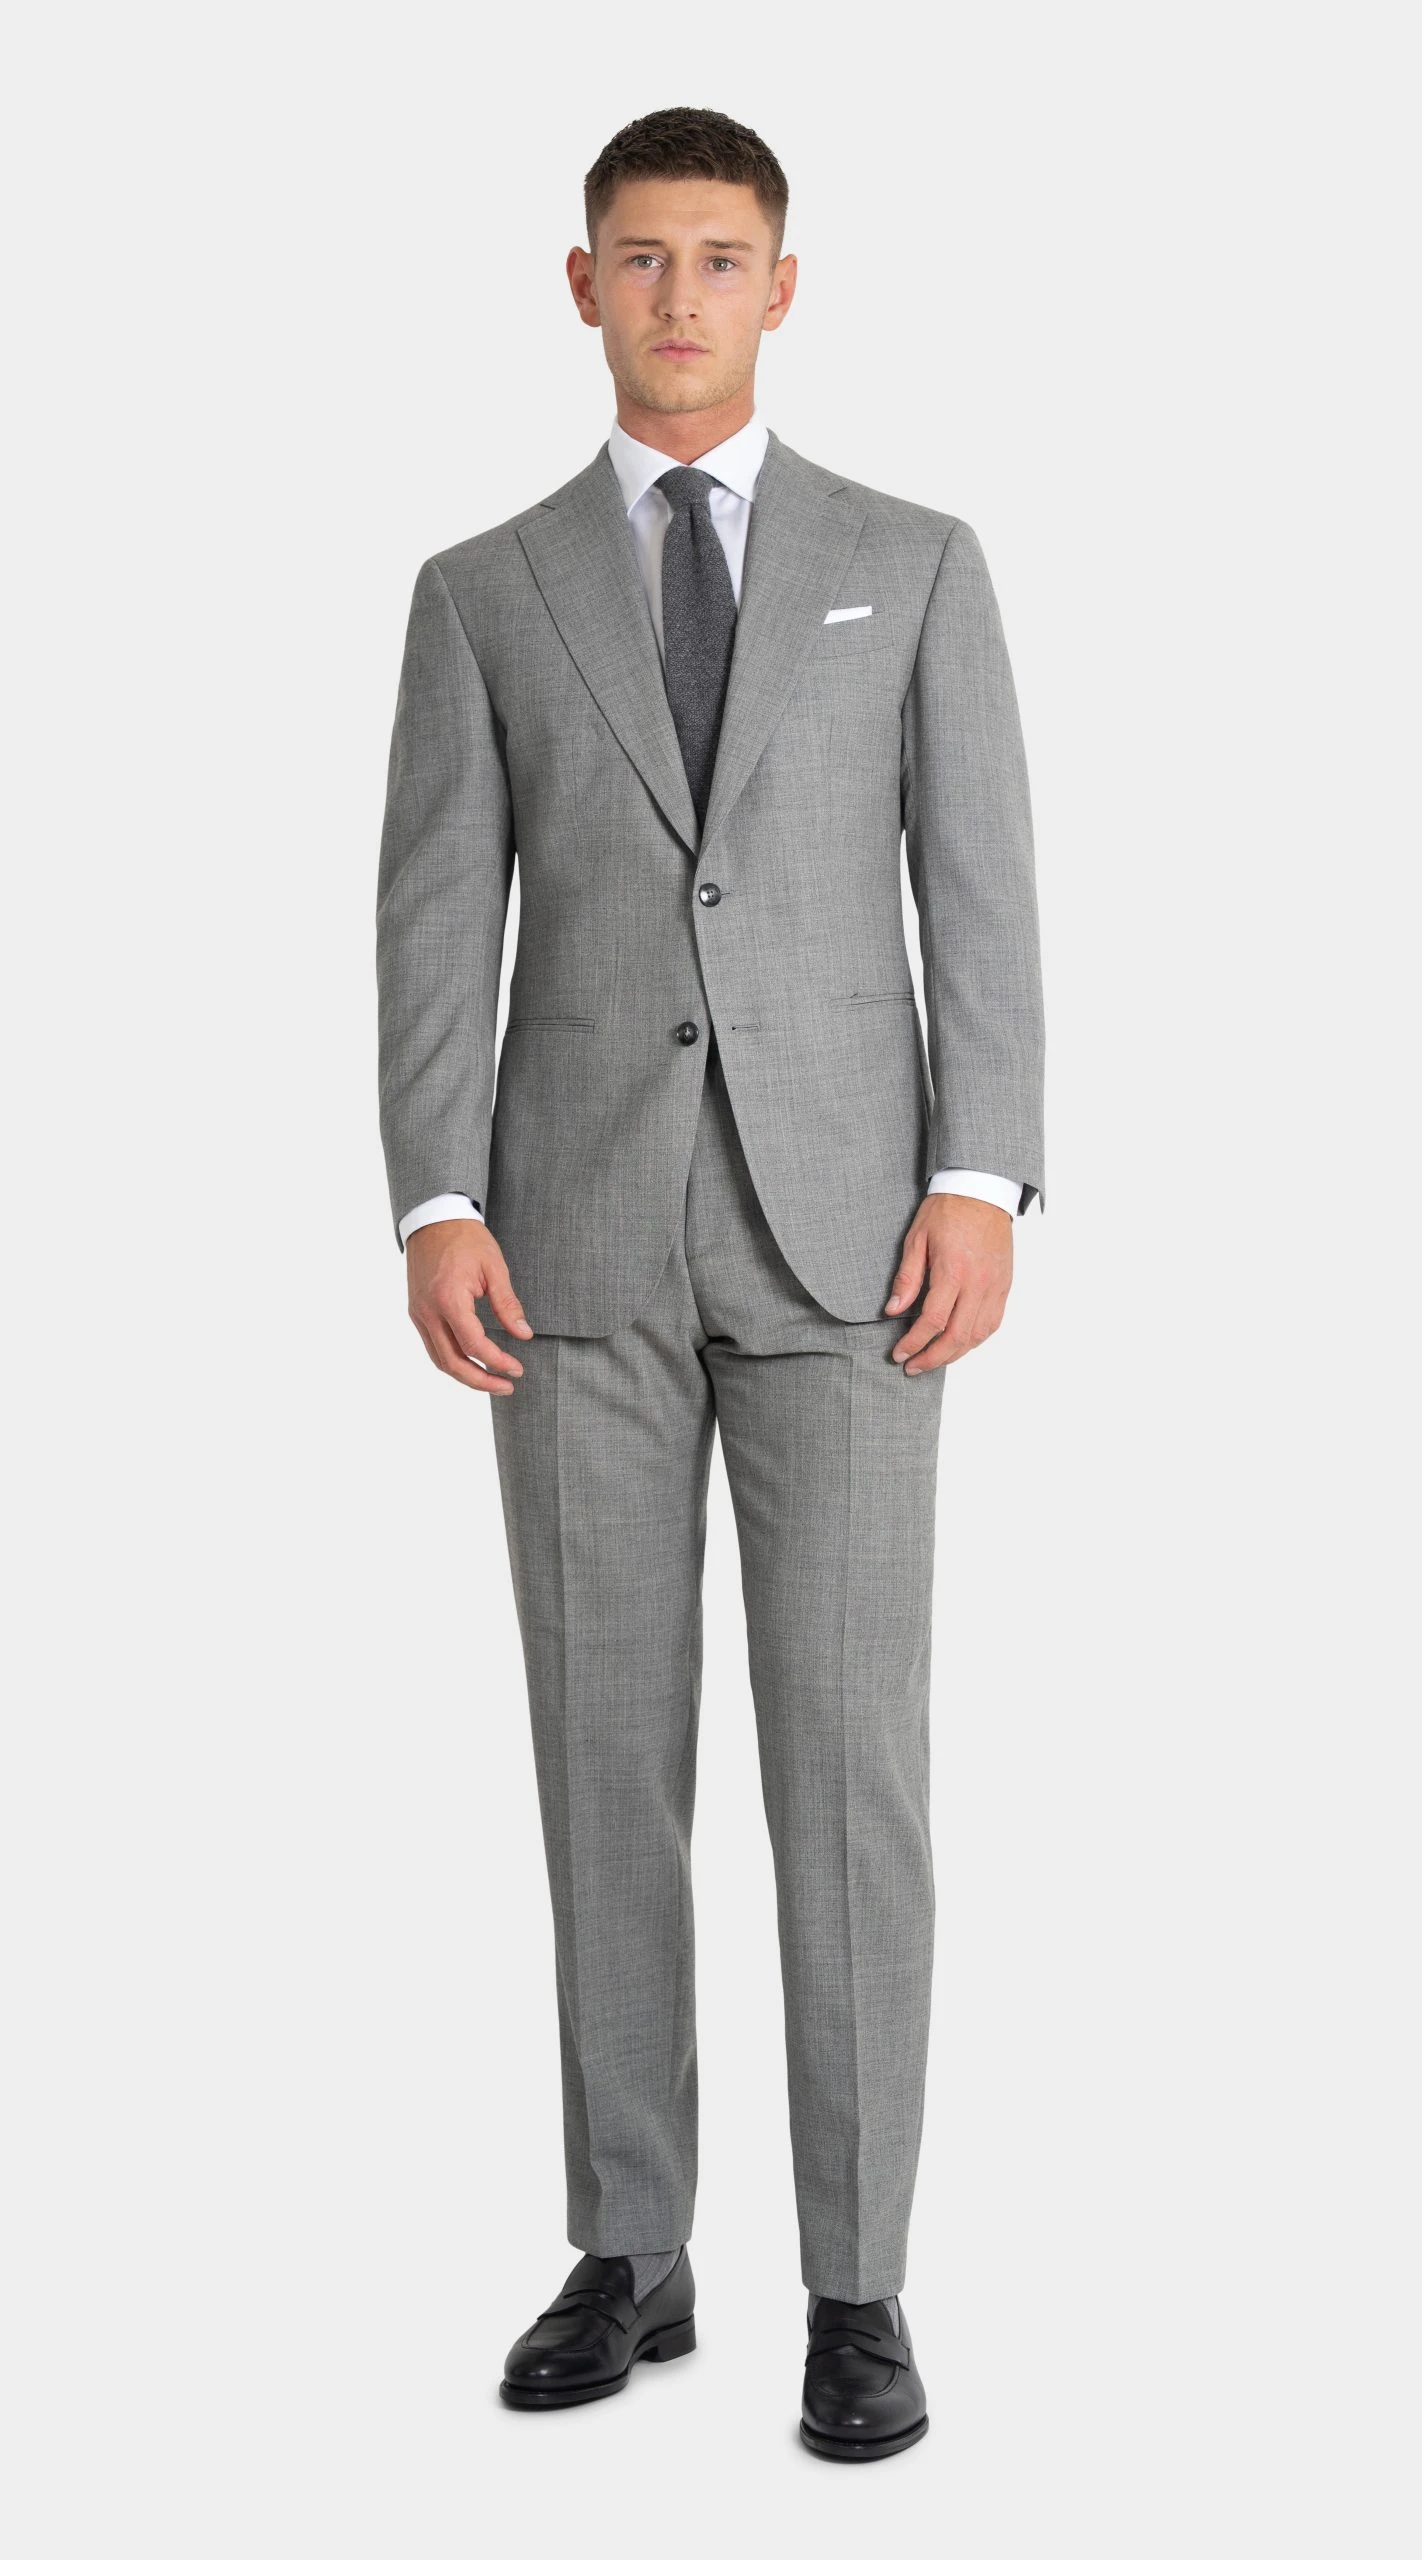 light grey suit in twistair, with black shoes